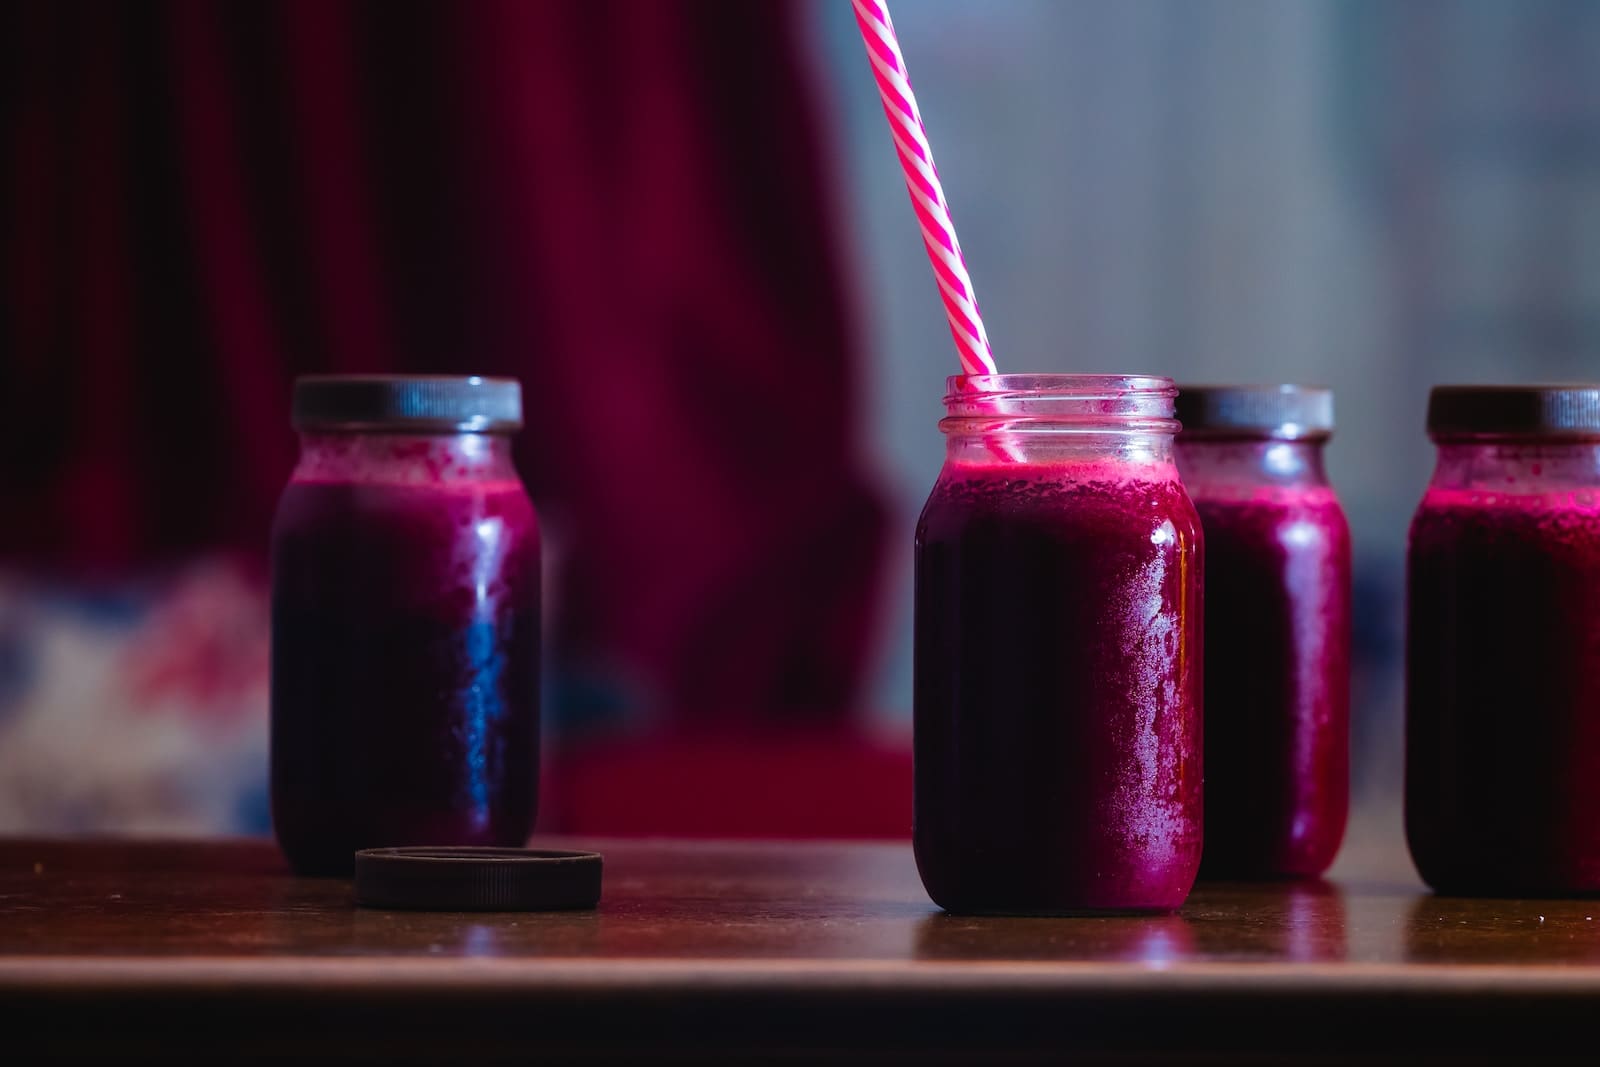 Nitrate rich beetroot juice